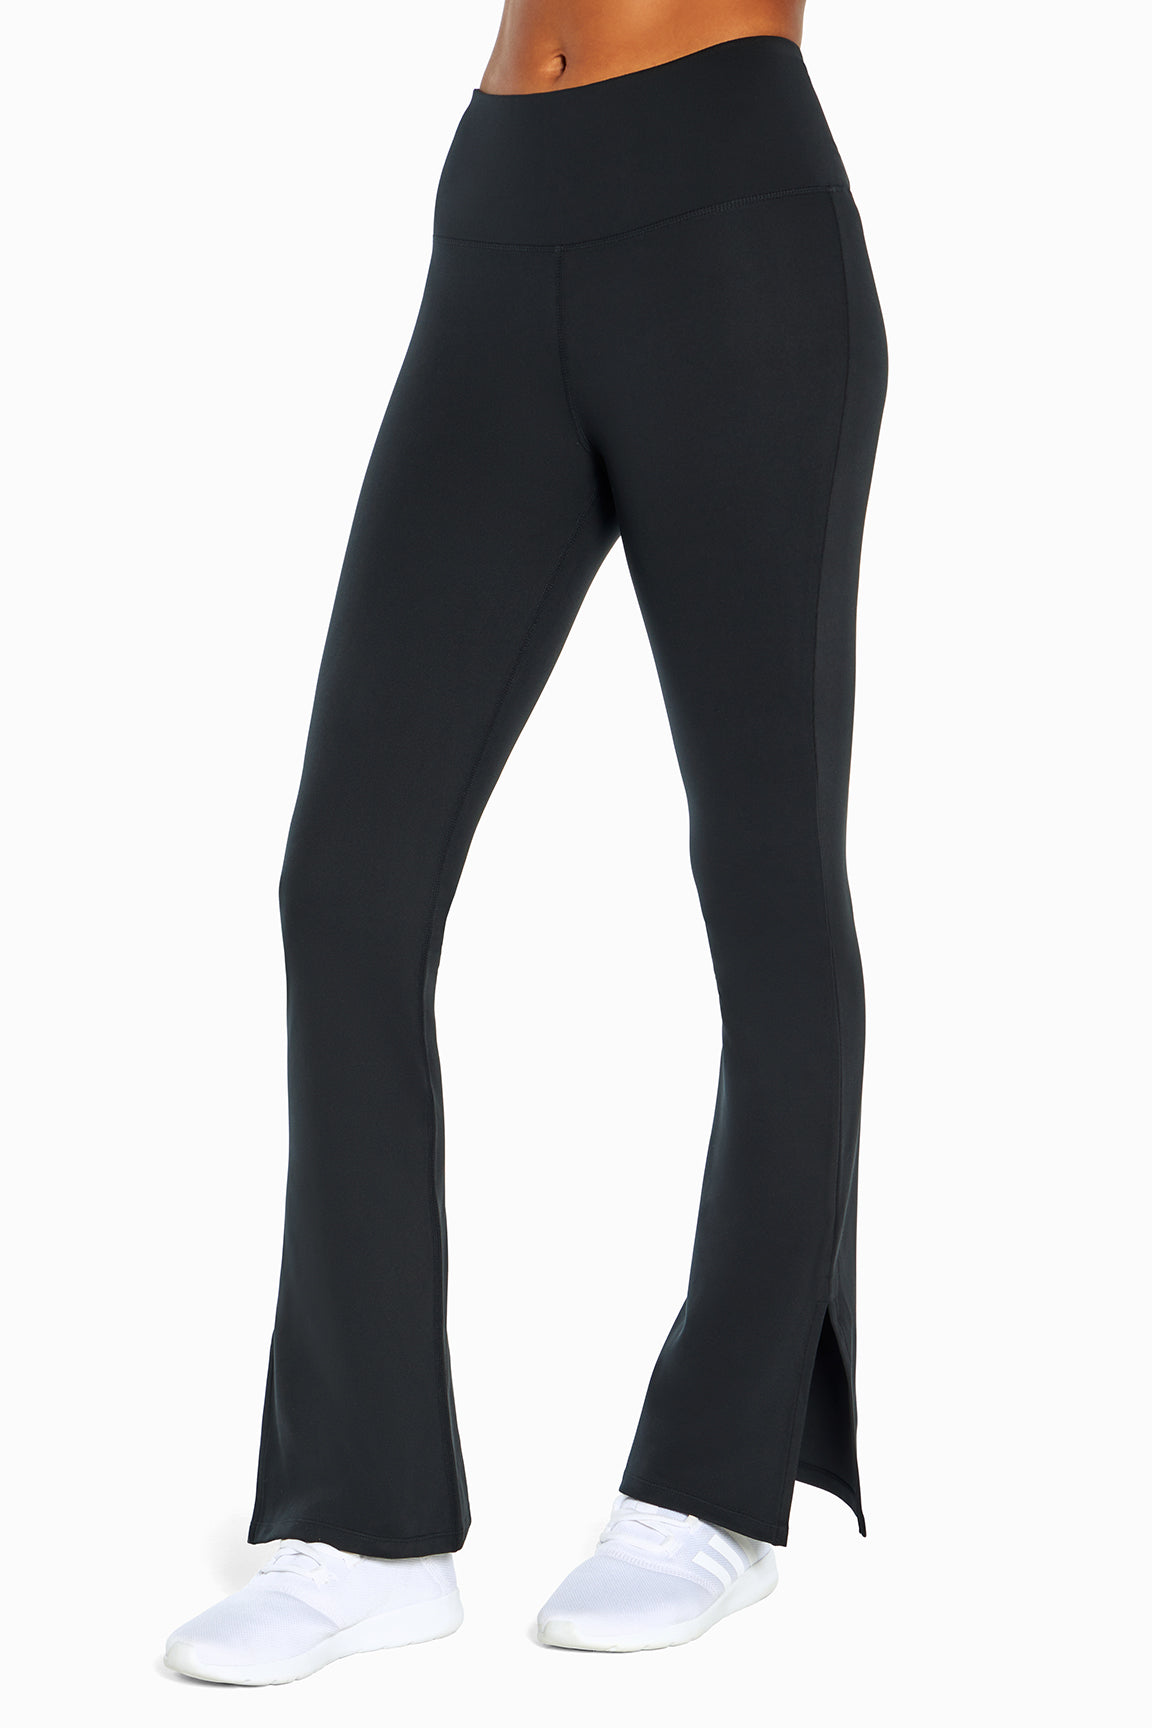 The Balance Collection by Marika Women Black Active Pants L